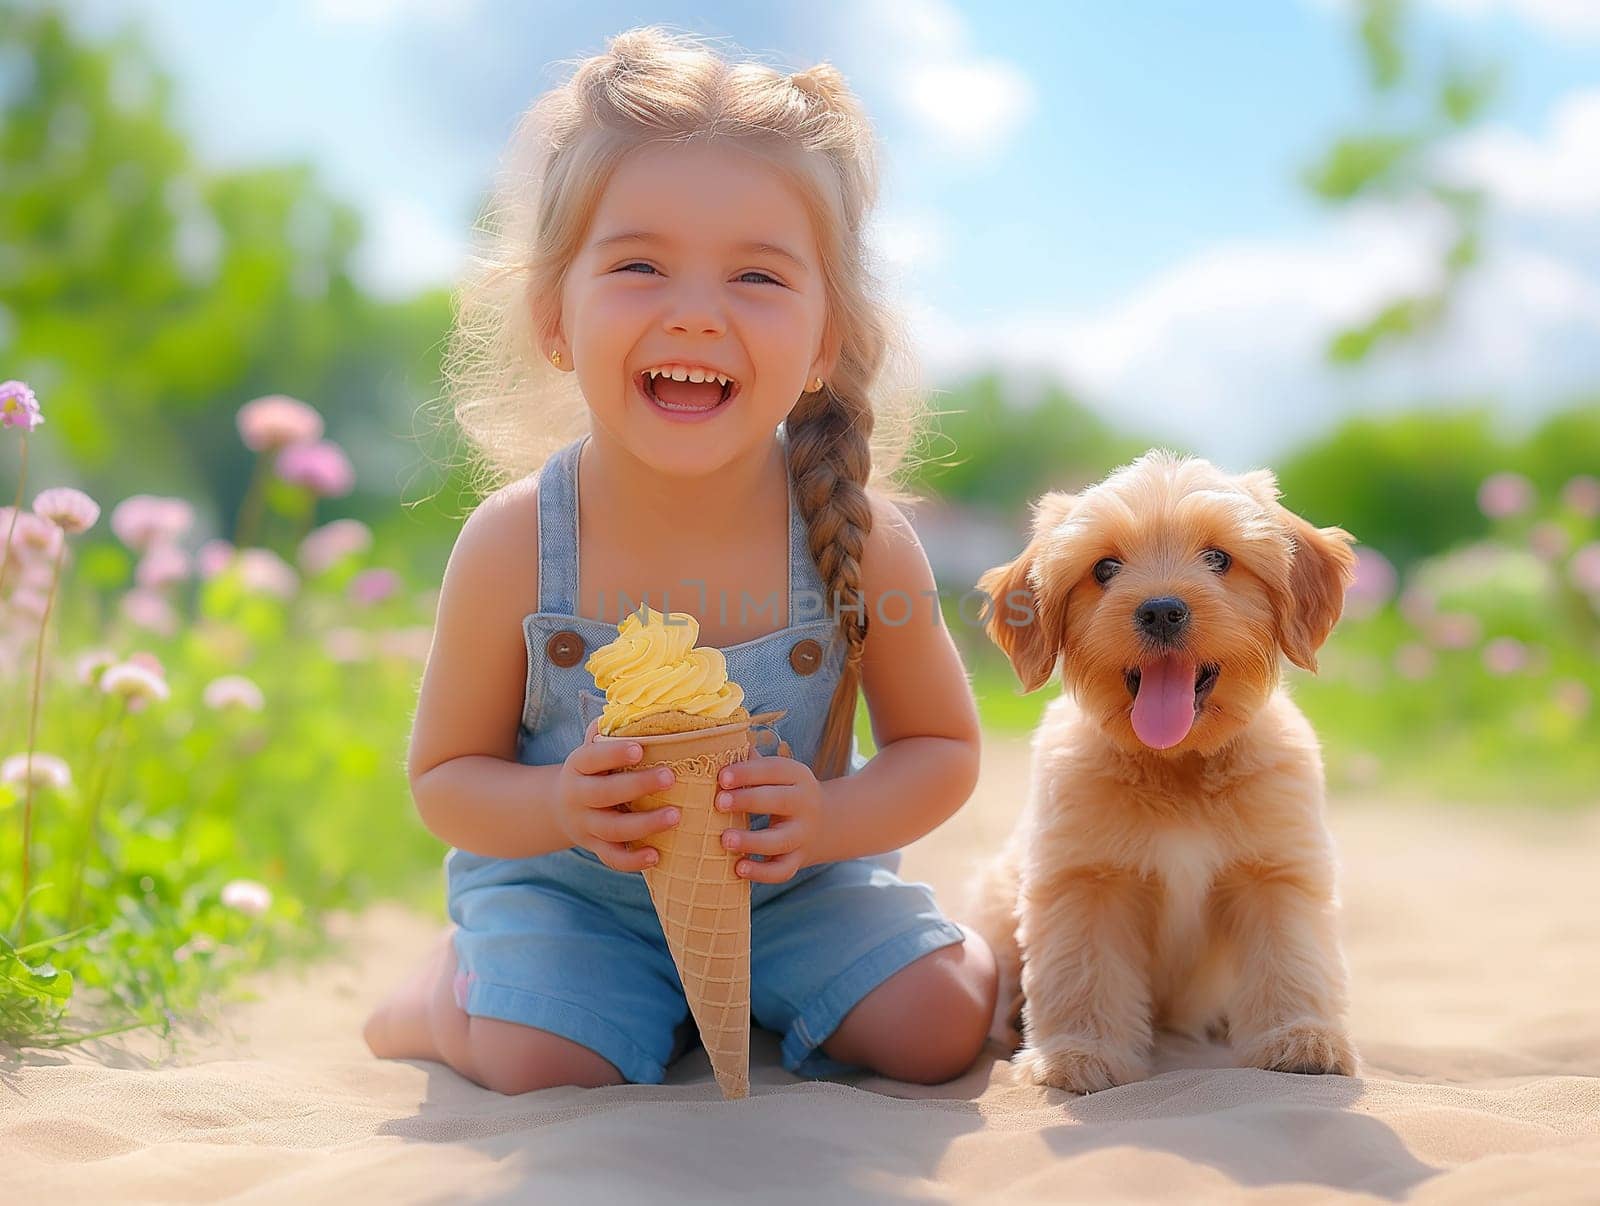 A joyful child with an ice cream cone beside a puppy in a sunny field. by Hype2art